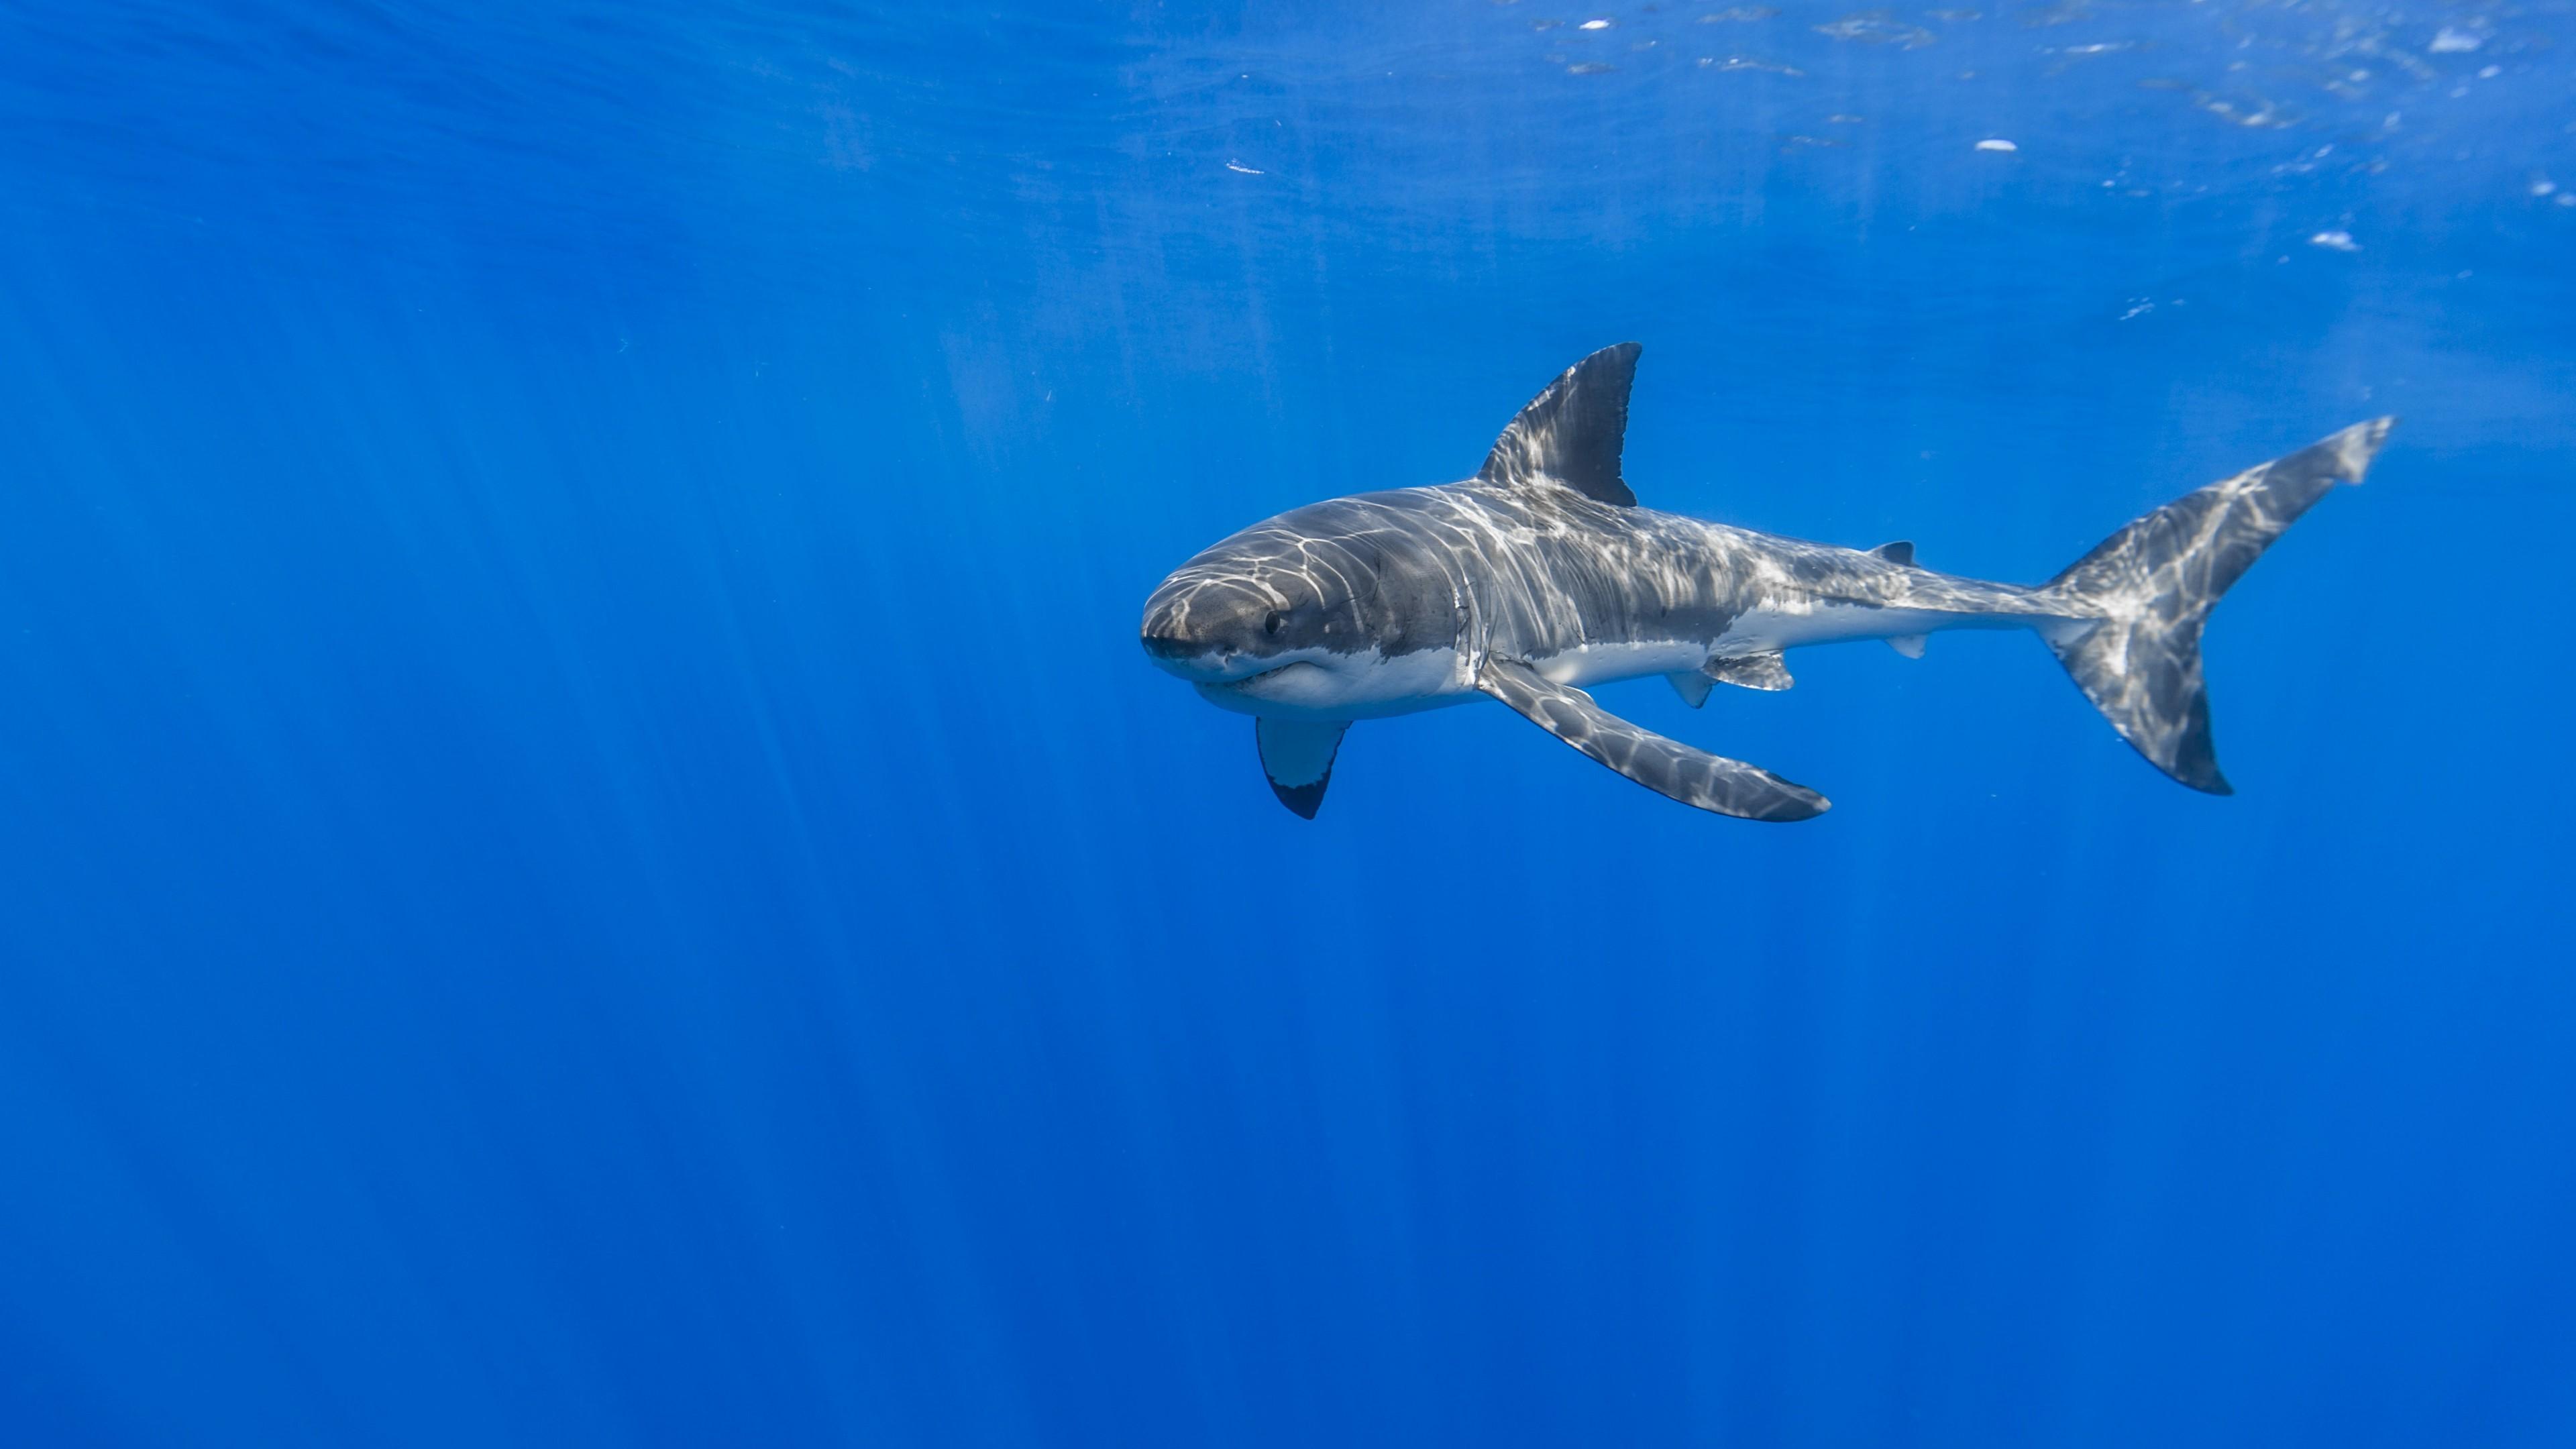 Great White Shark Wallpapers Wallpaper Cave